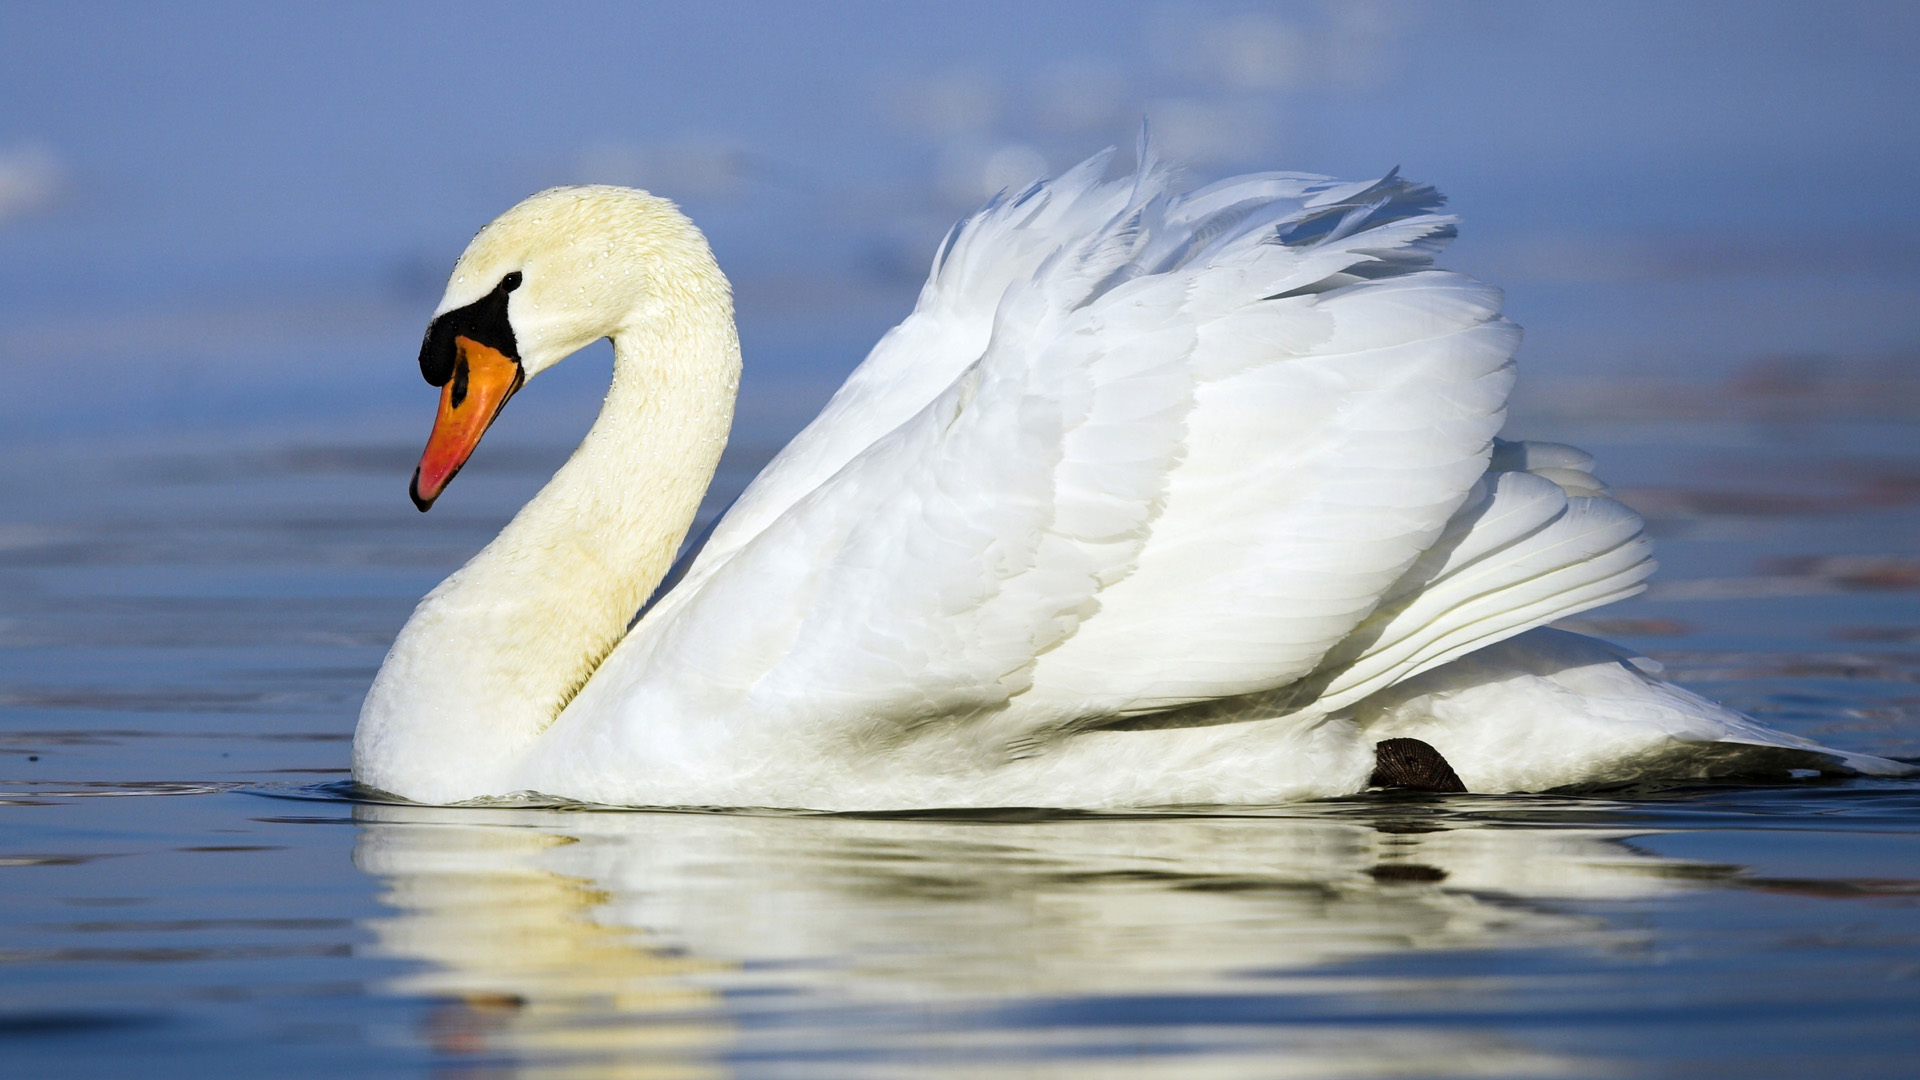 1920x1080 Graceful Swan High Definition, High Resolution HD Wallpapers : High Definition, High Resolution HD Wallpapers